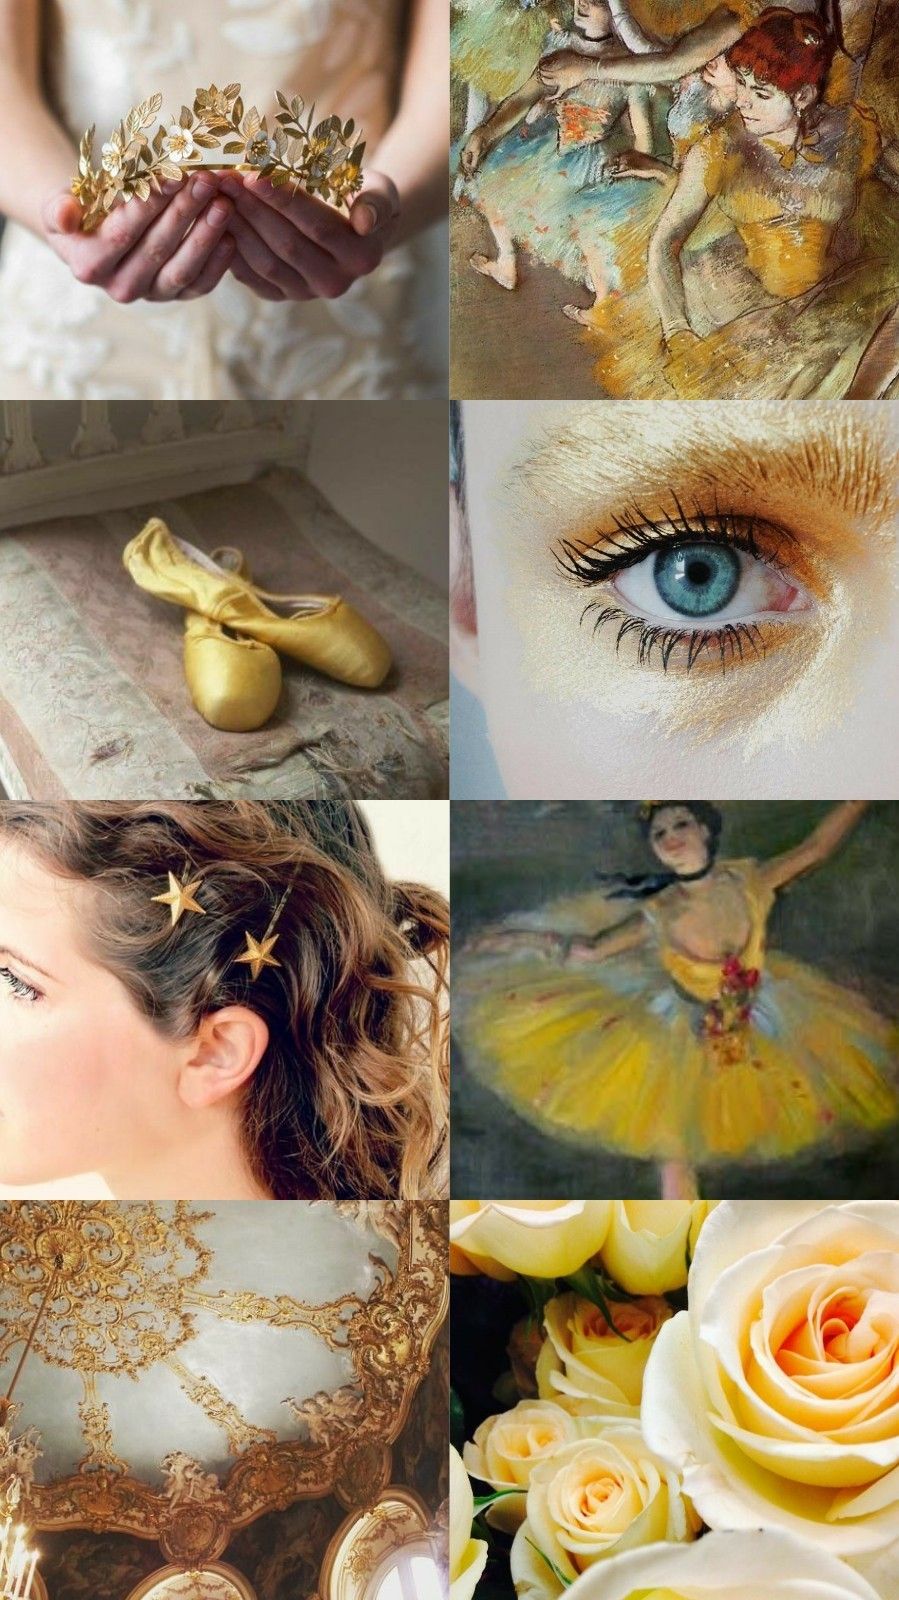 Collage of images of a ballerina, gold accessories, and a painting. - Ballet